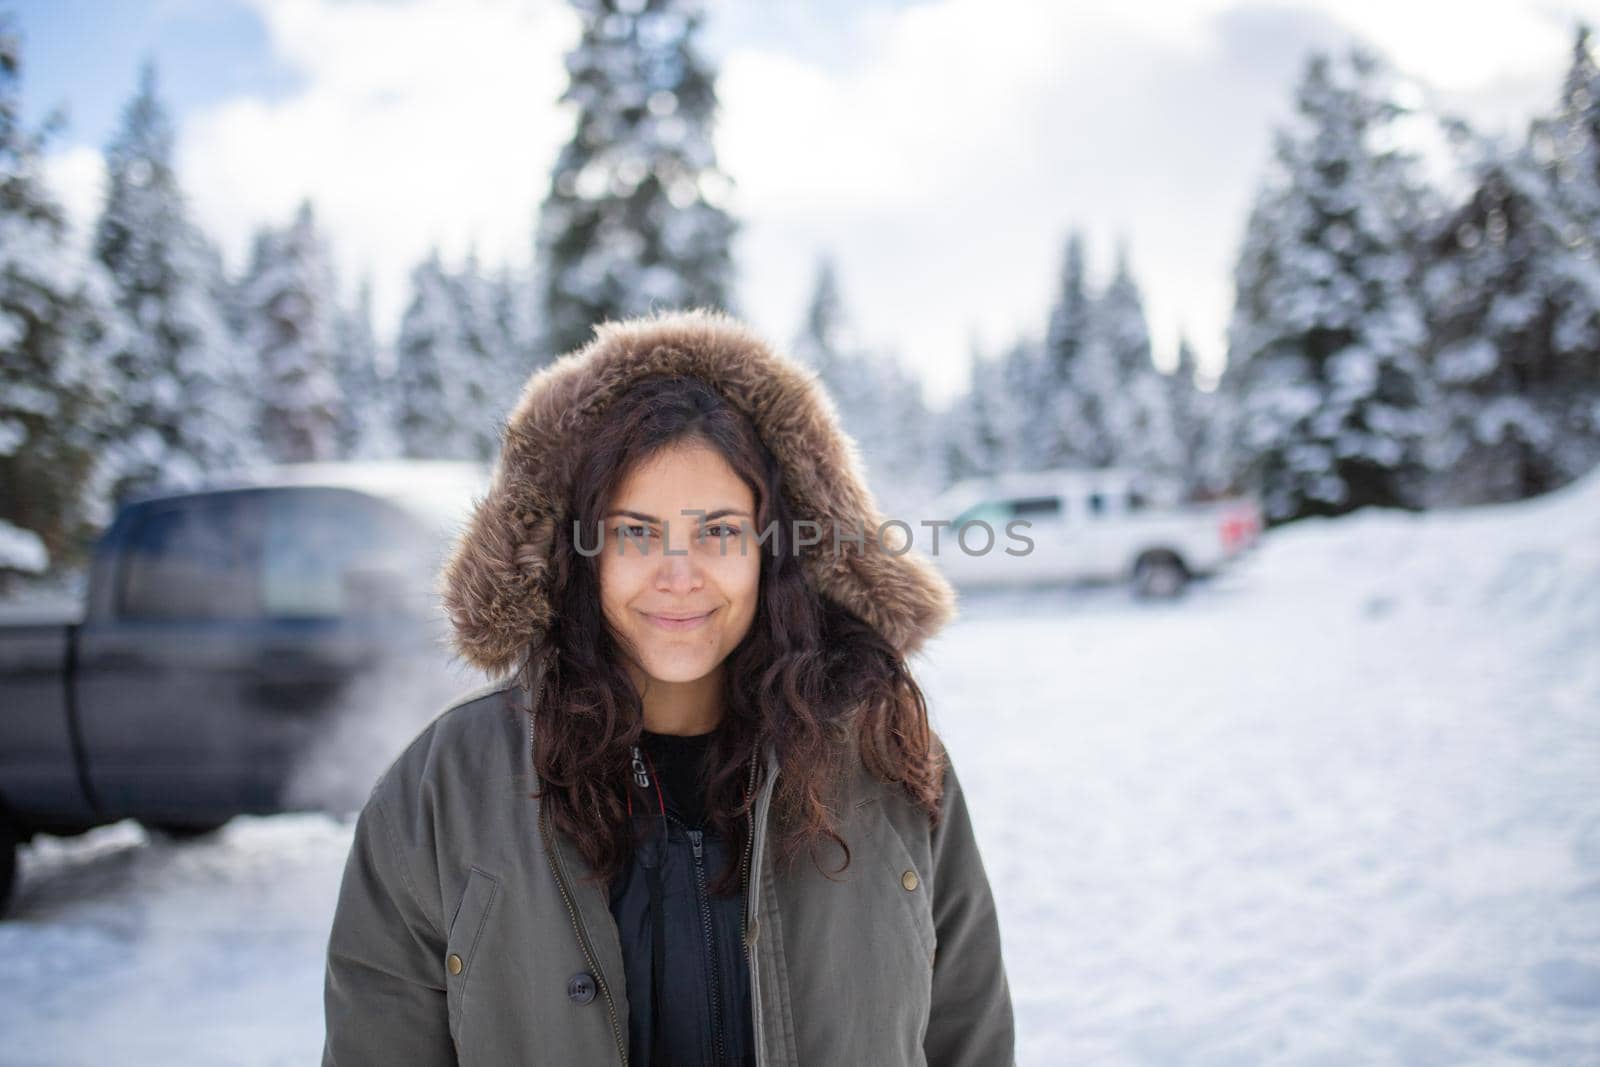 Happy woman standing with a beautiful snowy forest and trucks as background. Smiling hooded woman surrounded by snowy pine trees. Adventurous winter holiday